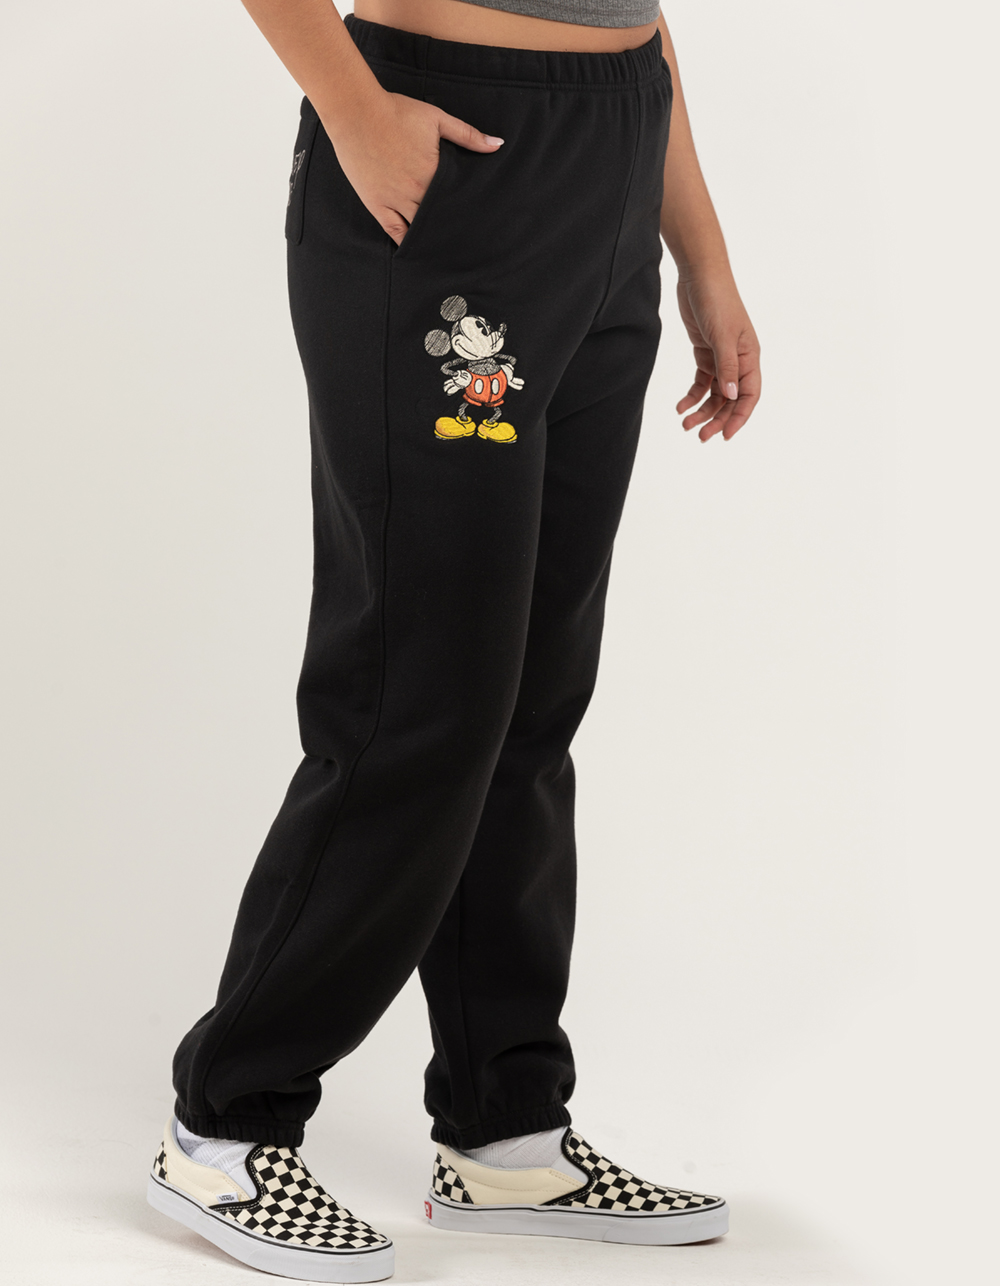 Disney Women's and Women's Plus Mickey Mouse Jogger Pants